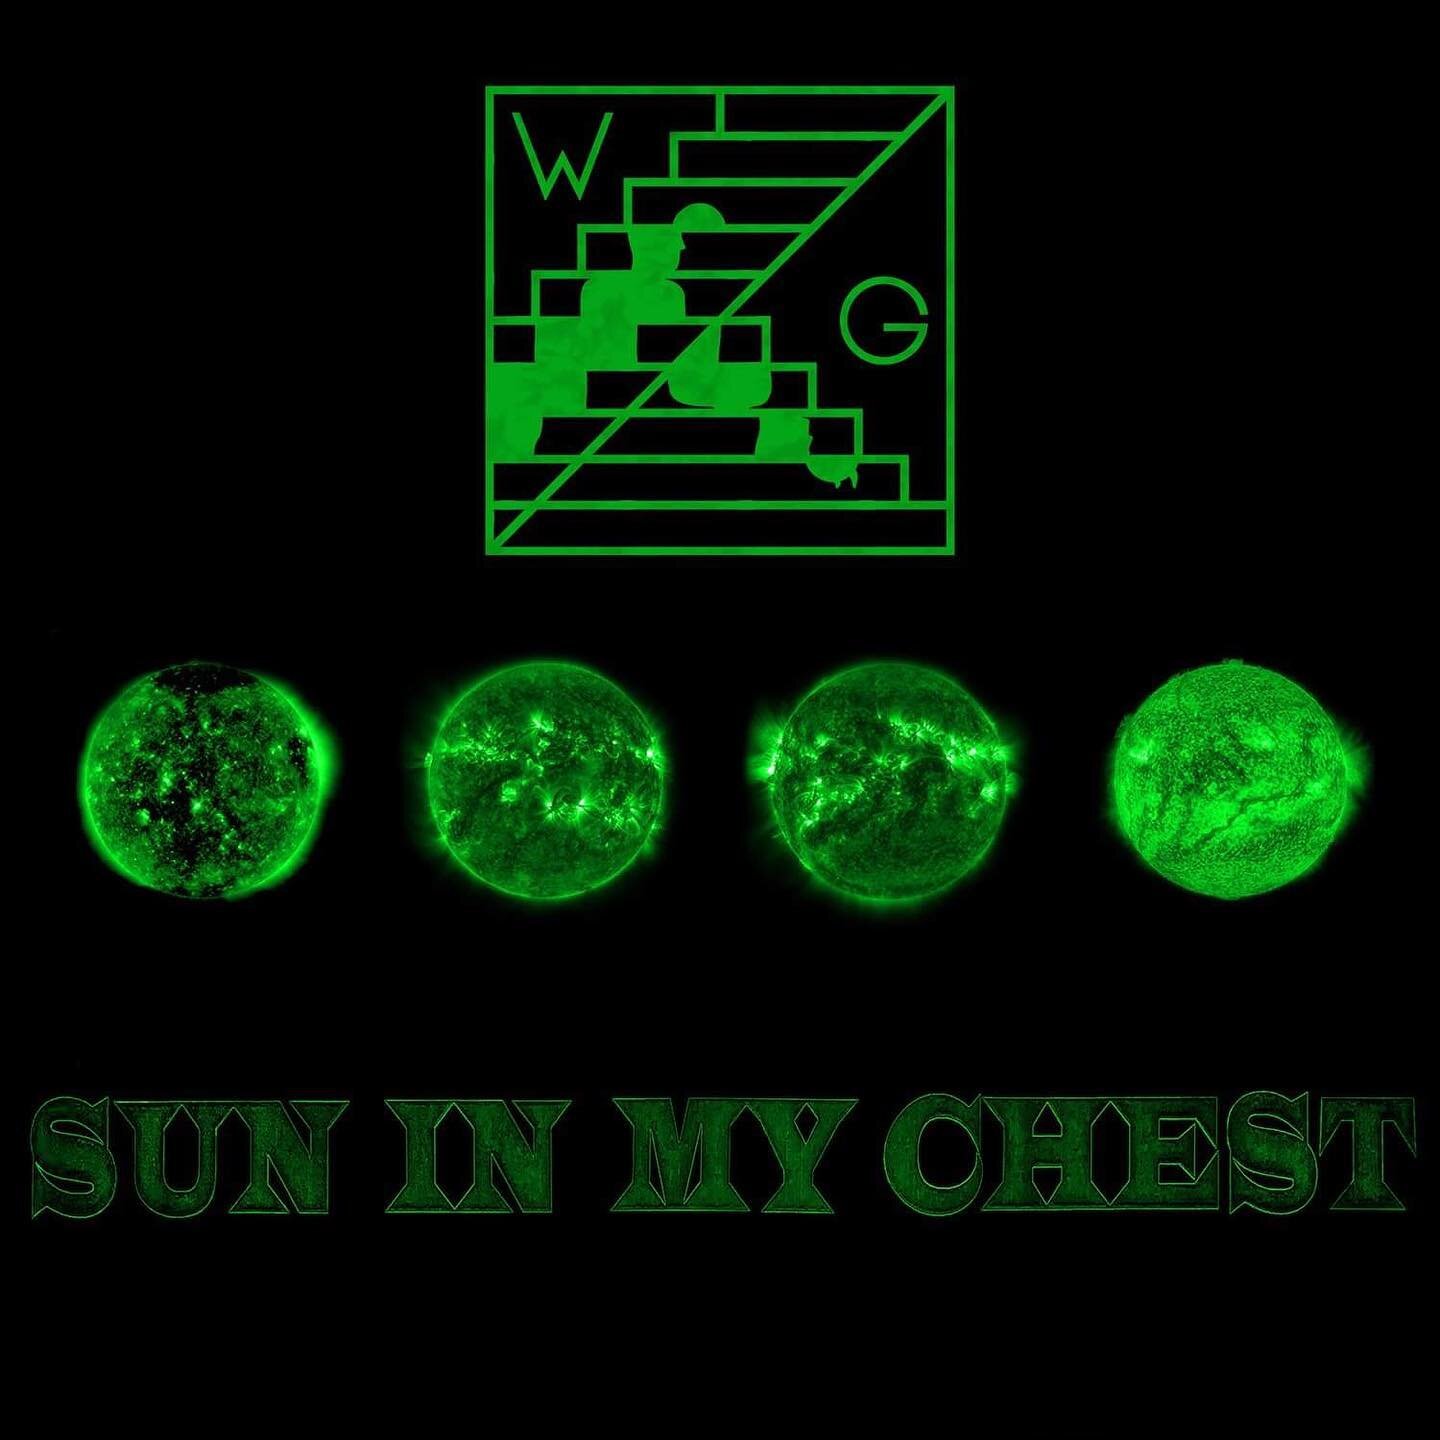 It&rsquo;s here! Sun In My Chest is now available to stream and download!

YouTube:
https://youtu.be/um49s5baErM

Spotify:
https://open.spotify.com/track/20dsYFG9snUU3q0F73c9Br

Apple Music:
https://geo.music.apple.com/us/album/_/1479314611?i=1479314